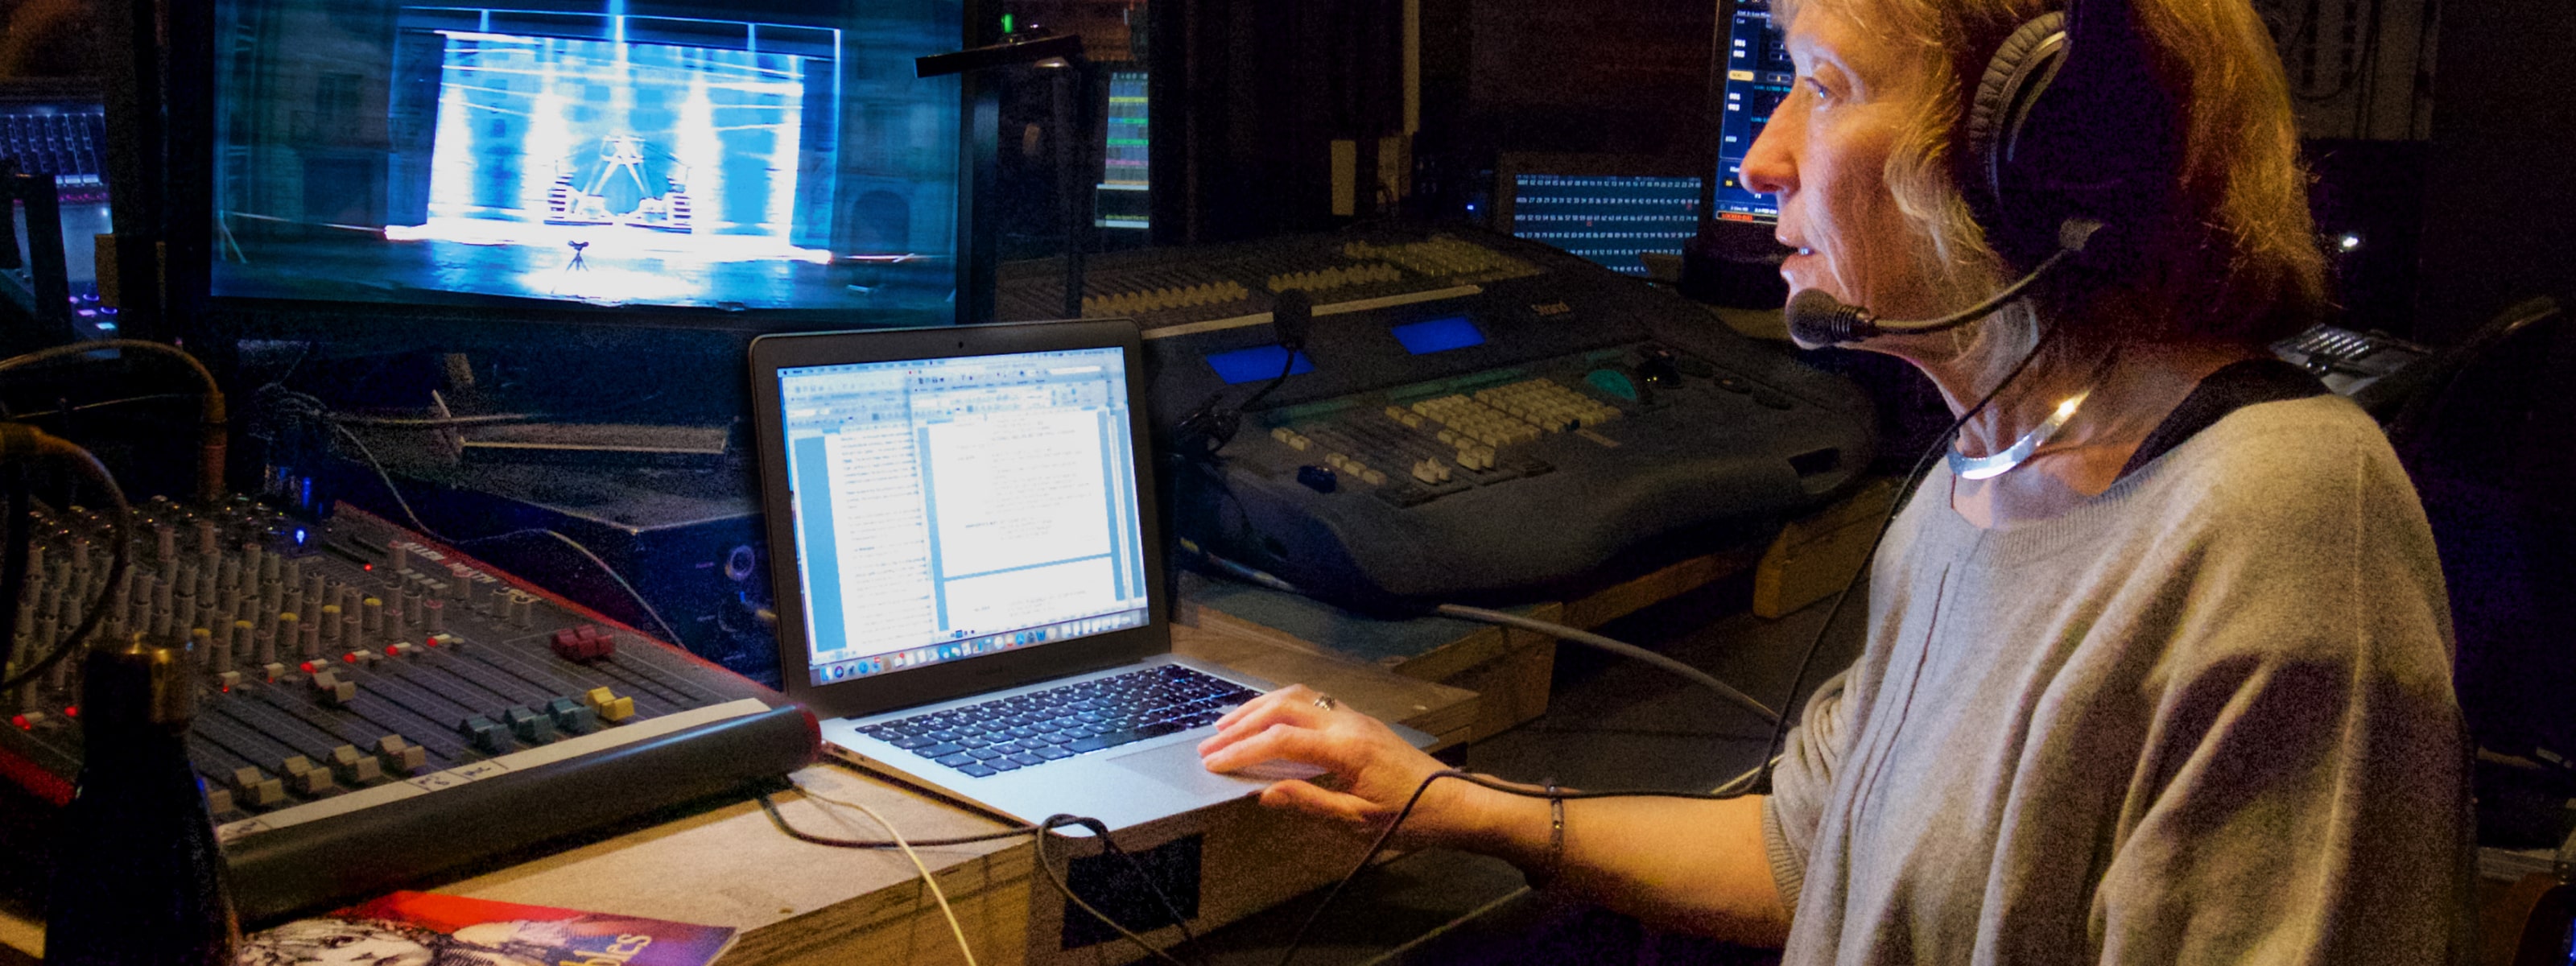 Anne Hornsby of Mind's Eye, backstage providing audio description for a theatre performance